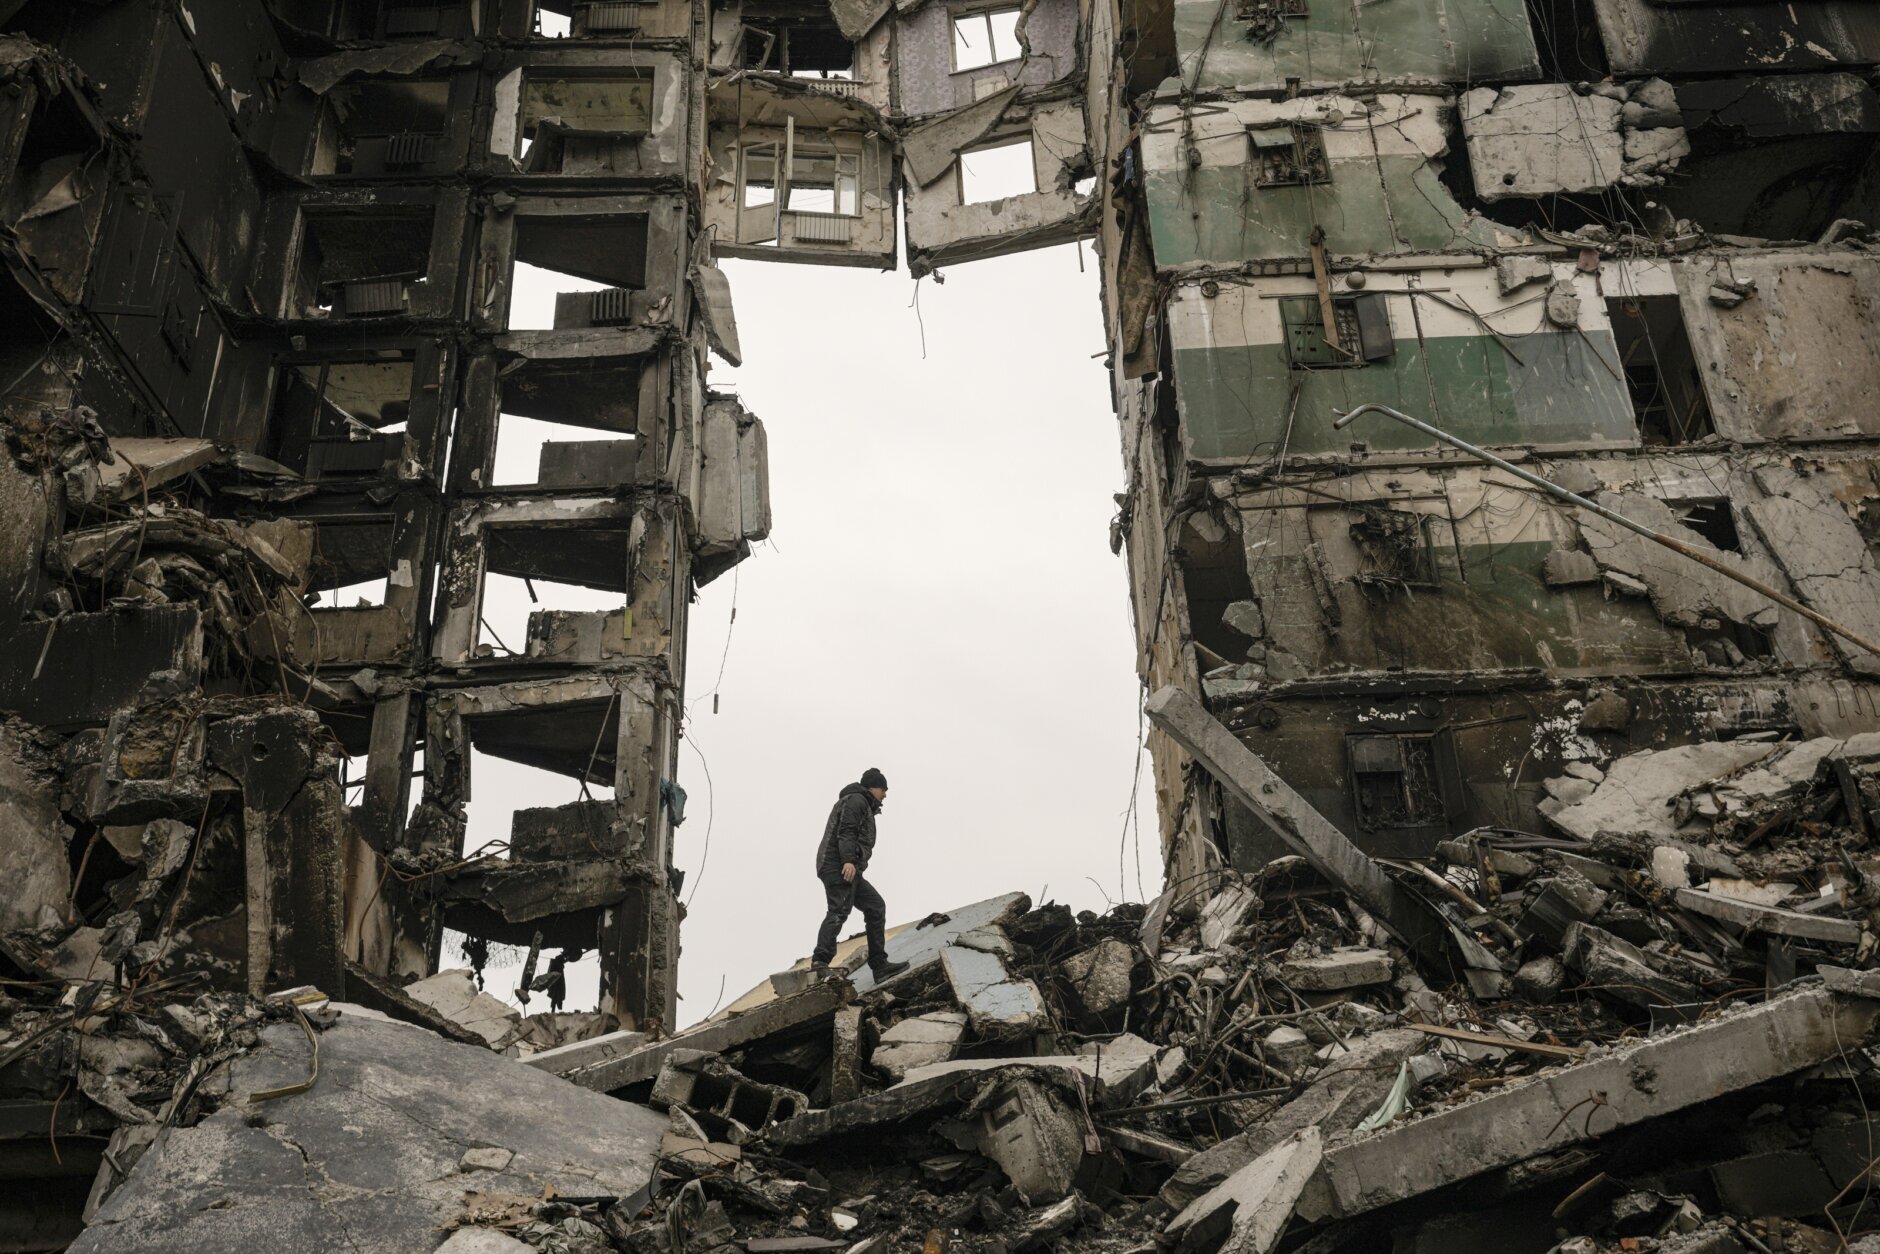 A resident looks for belongings in an apartment building destroyed during fighting between Ukrainian and Russian forces in Borodyanka, Ukraine, Tuesday, April 5, 2022. Ukrainian President Volodymyr Zelenskyy accused Russian troops of gruesome atrocities in Ukraine and told the U.N. Security Council on Tuesday that those responsible should immediately be brought up on war crimes charges in front of a tribunal like the one set up at Nuremberg after World War II.(AP Photo/Vadim Ghirda)